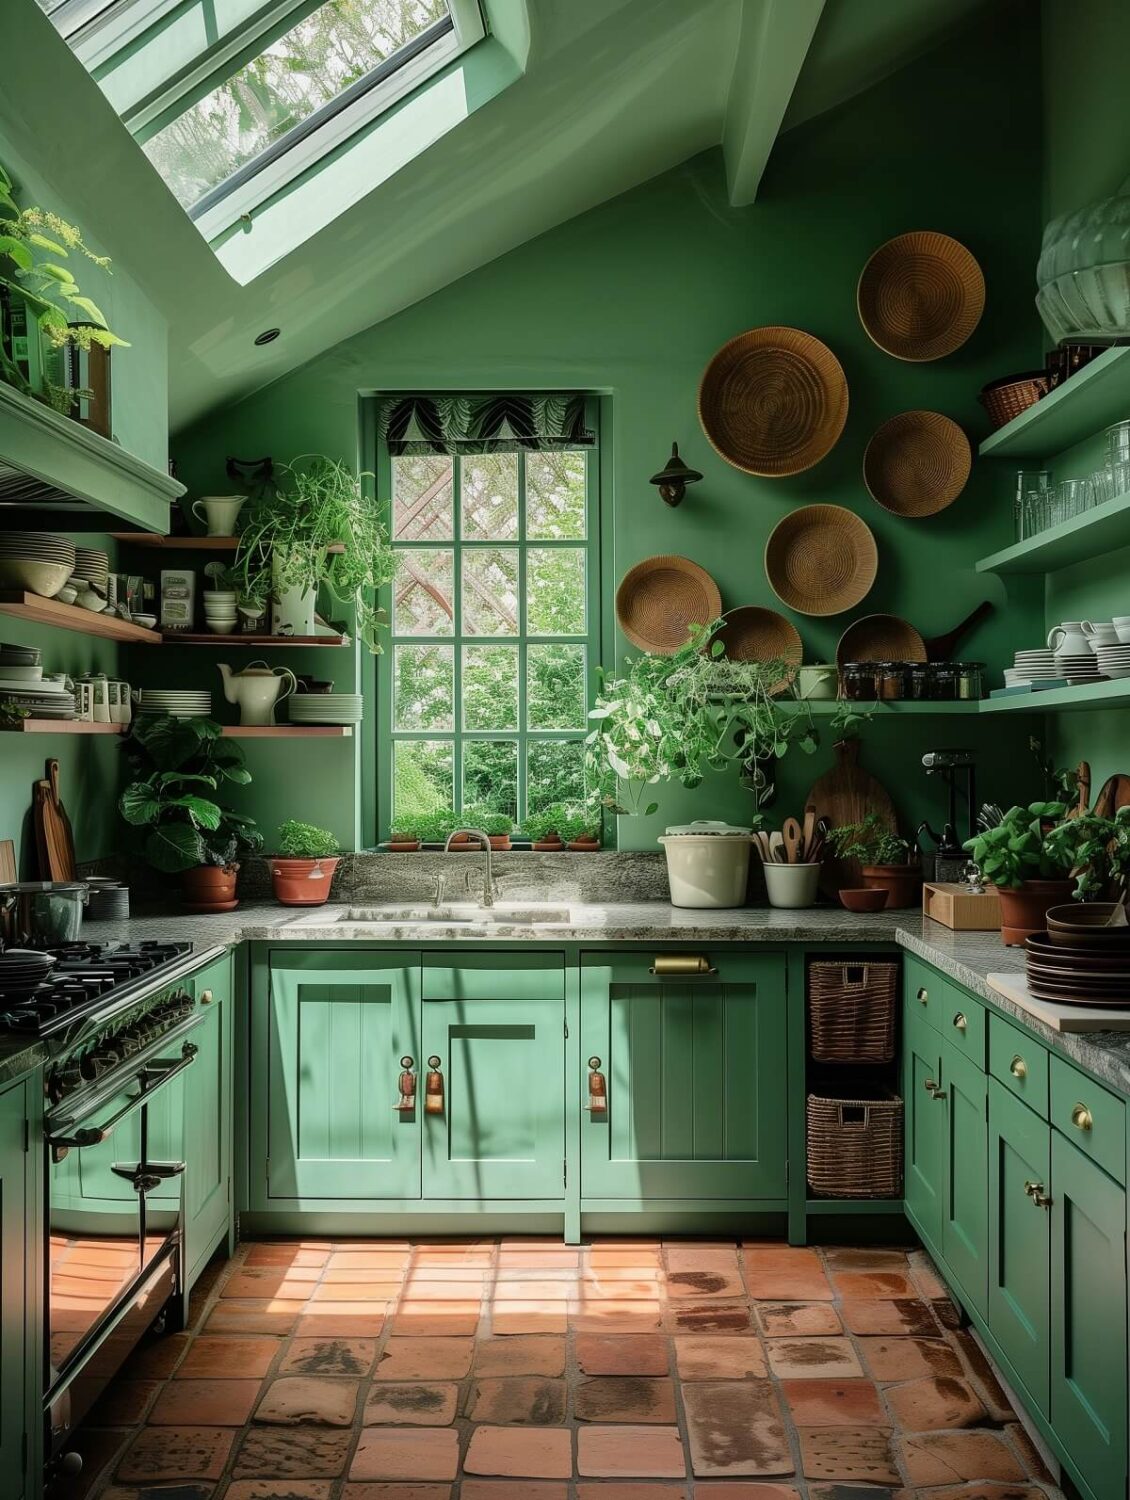 cozy green cottage kitchen with shelves terracotta floor and skylight nordroom